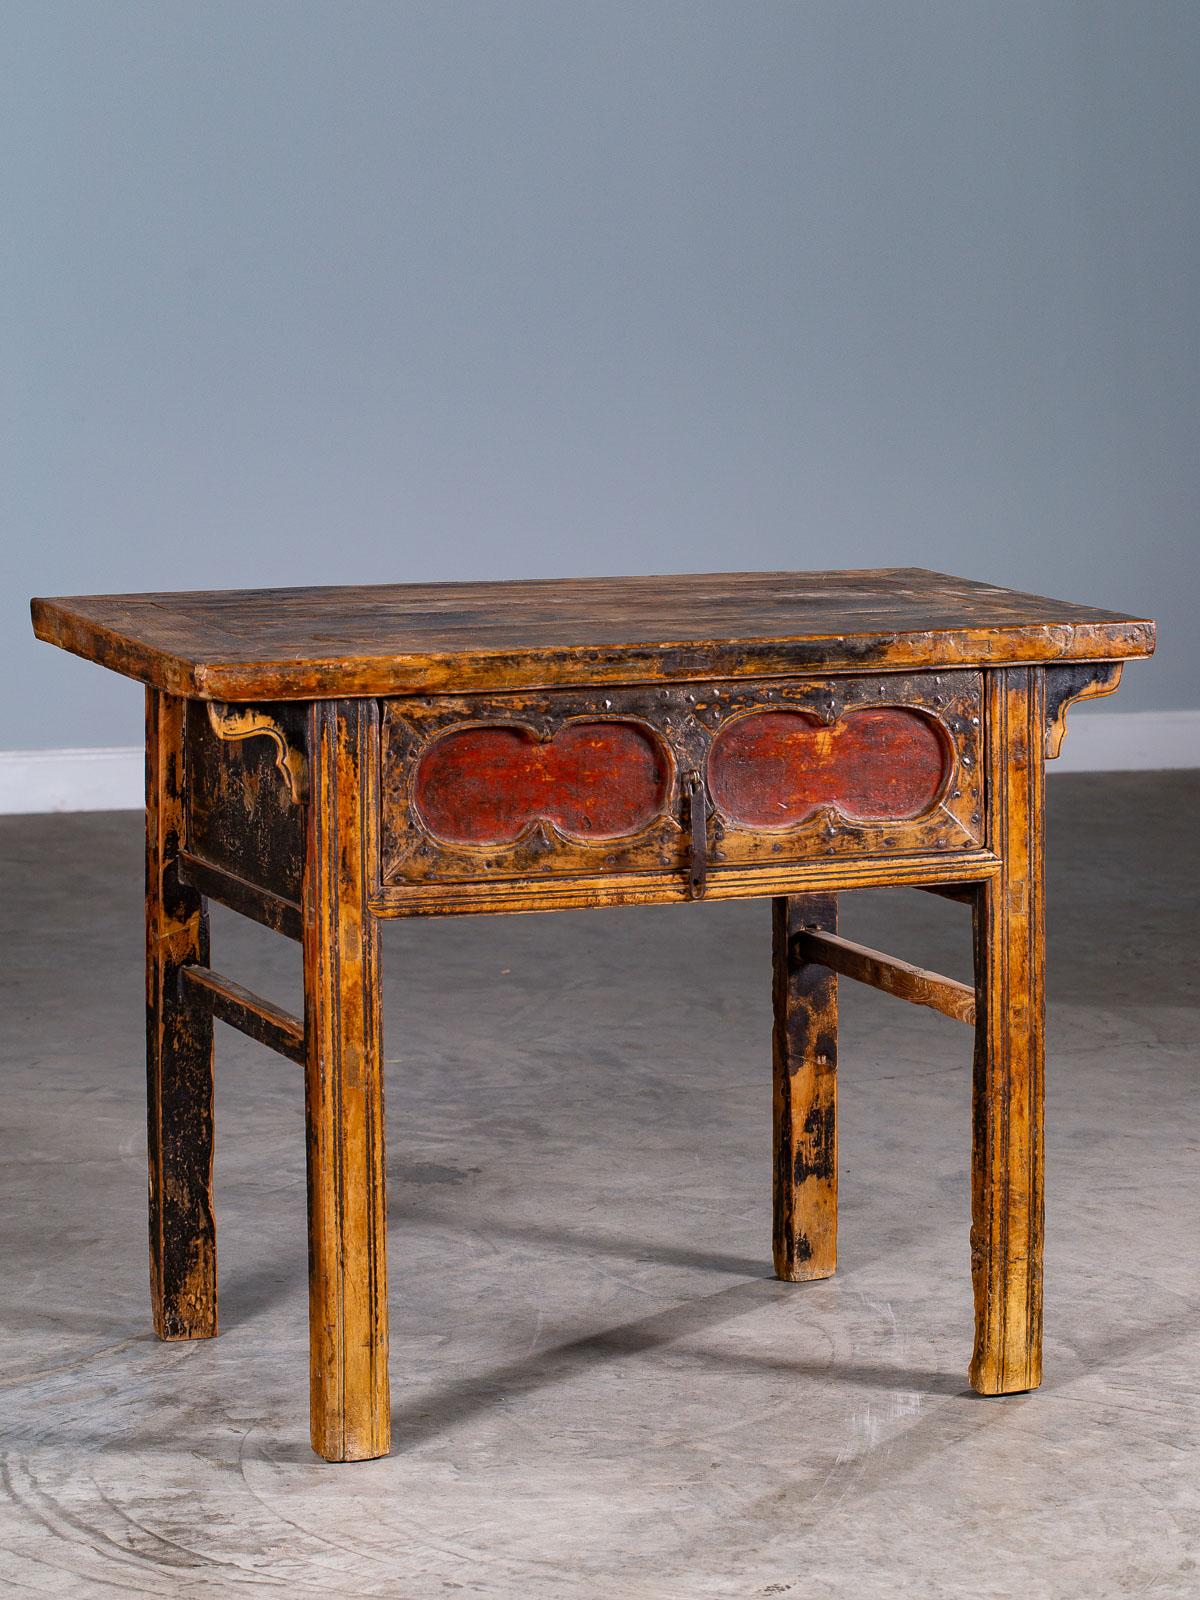 Antique Chinese Table with Drawer Kuang Hsu Period, China, circa 1875 10